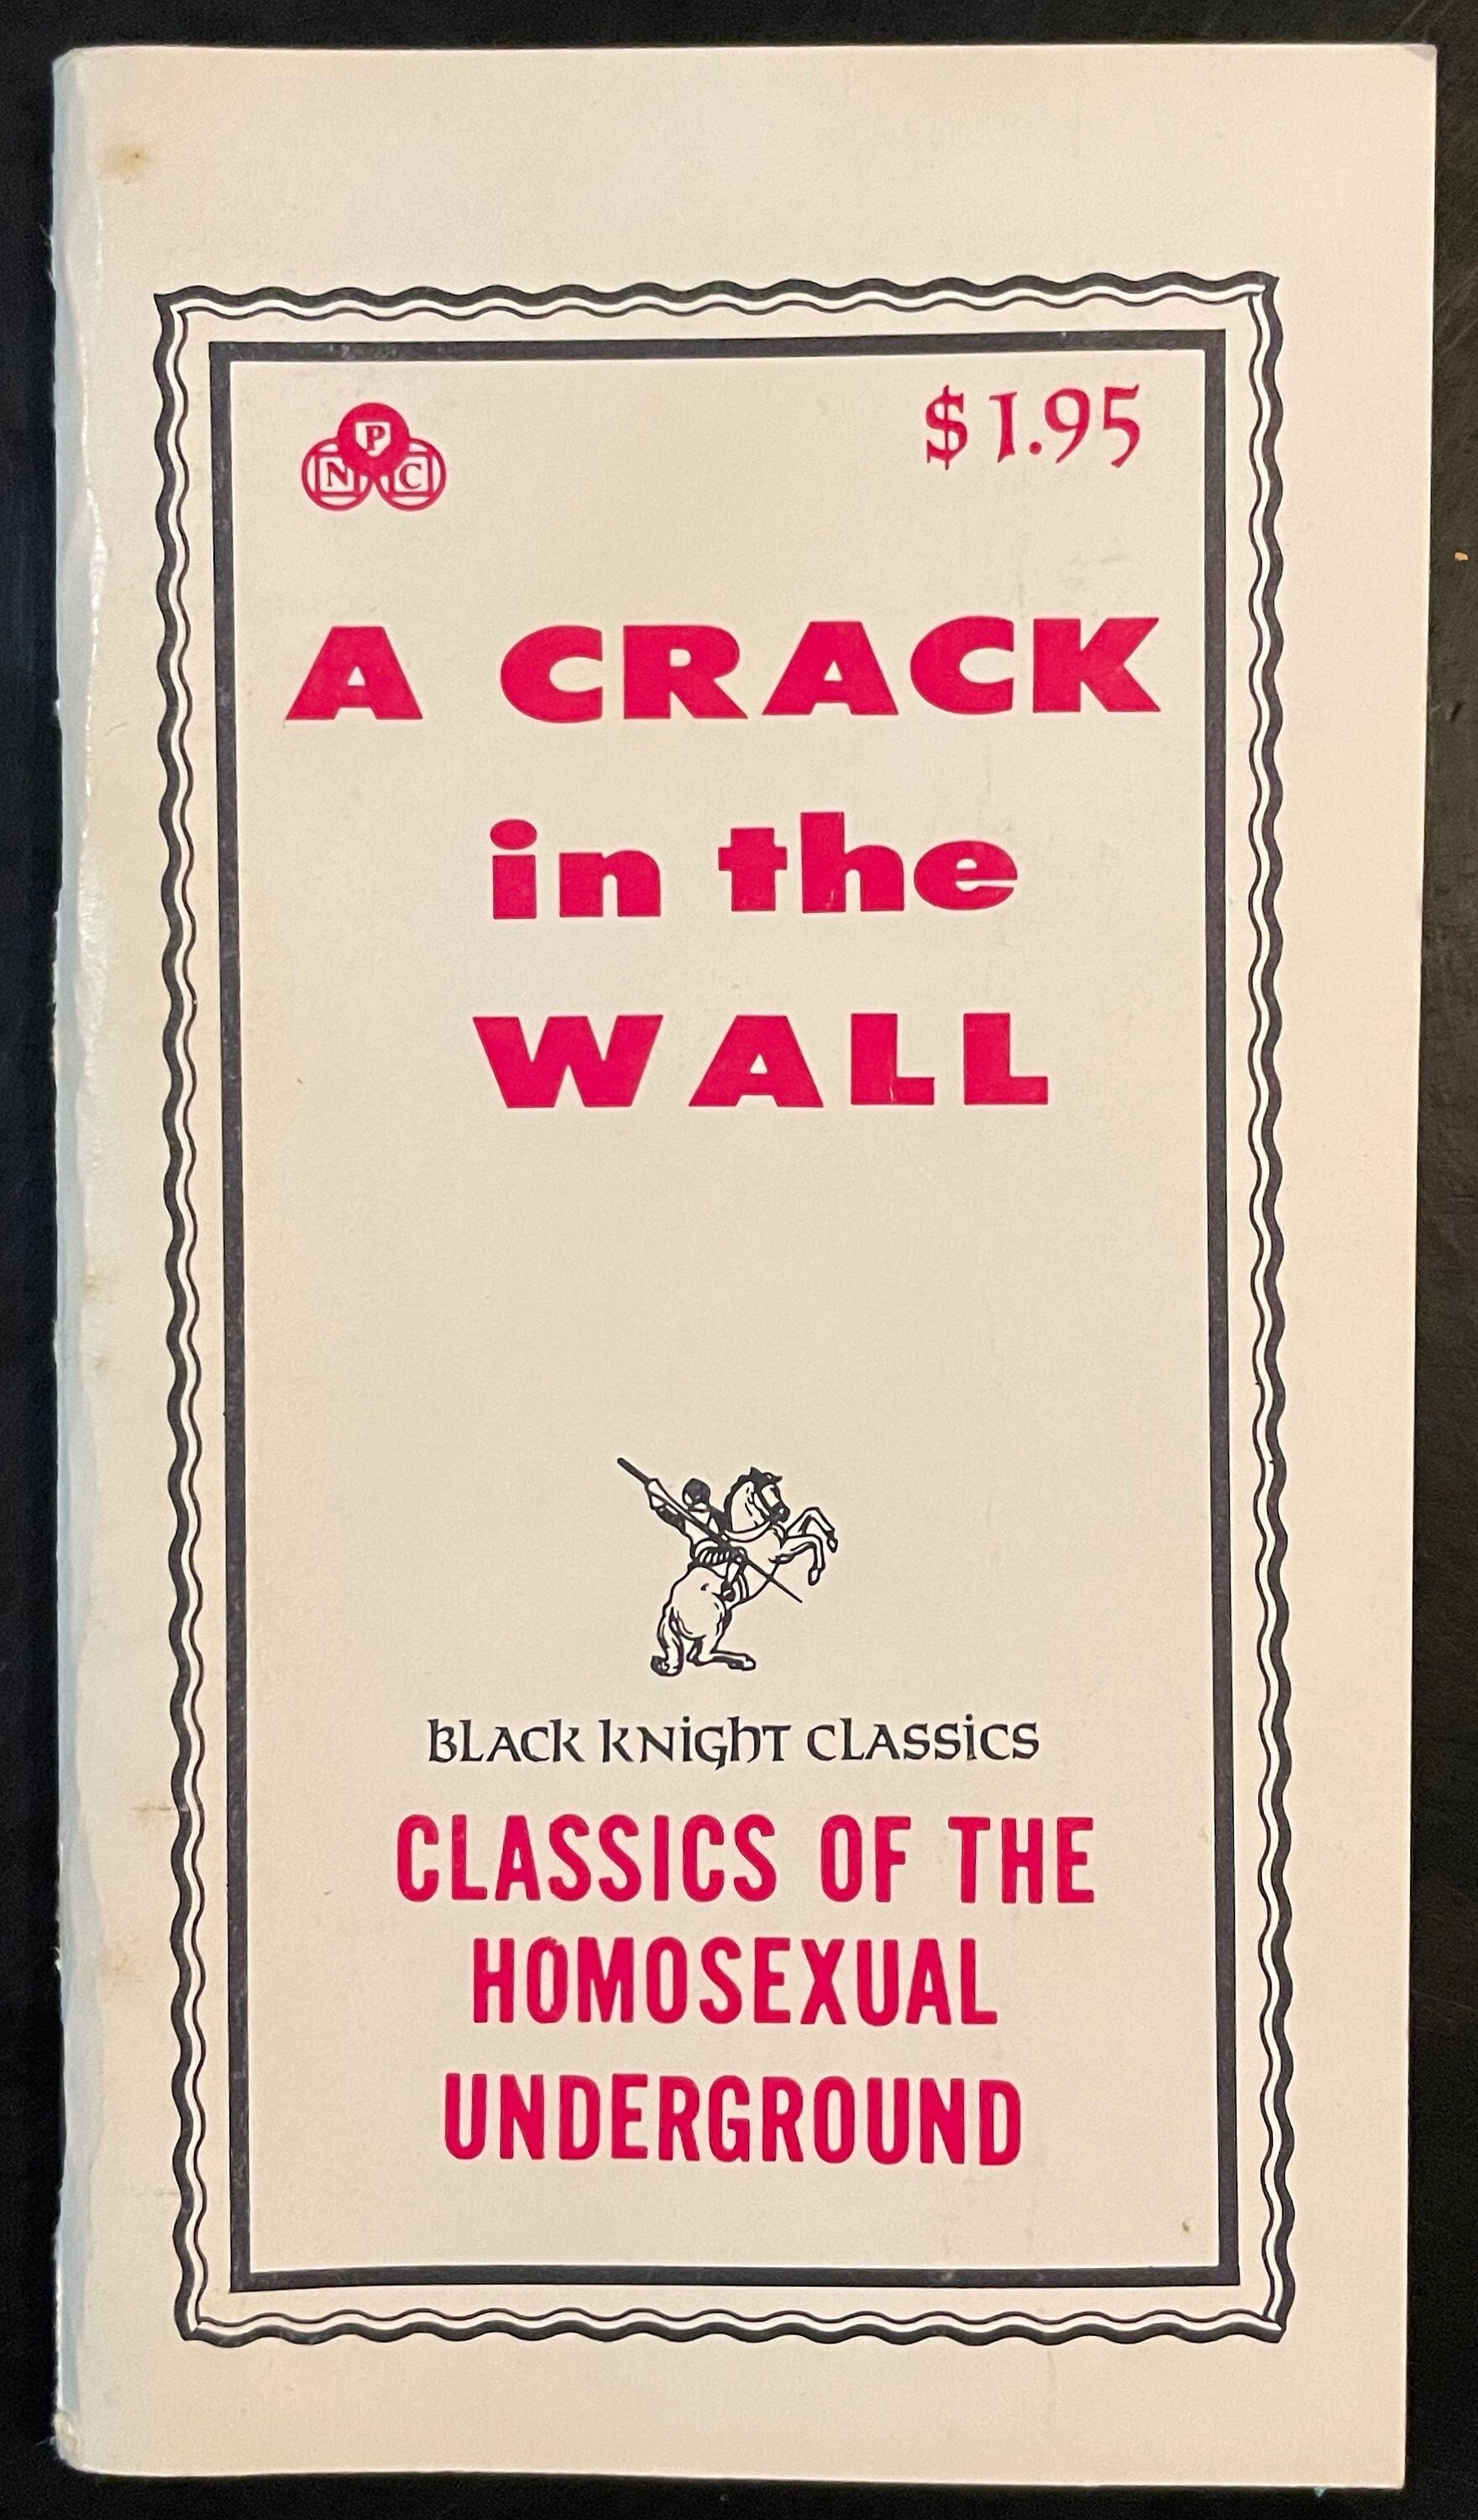 A Crack in the Wall Black Knight Classics of the Homosexual